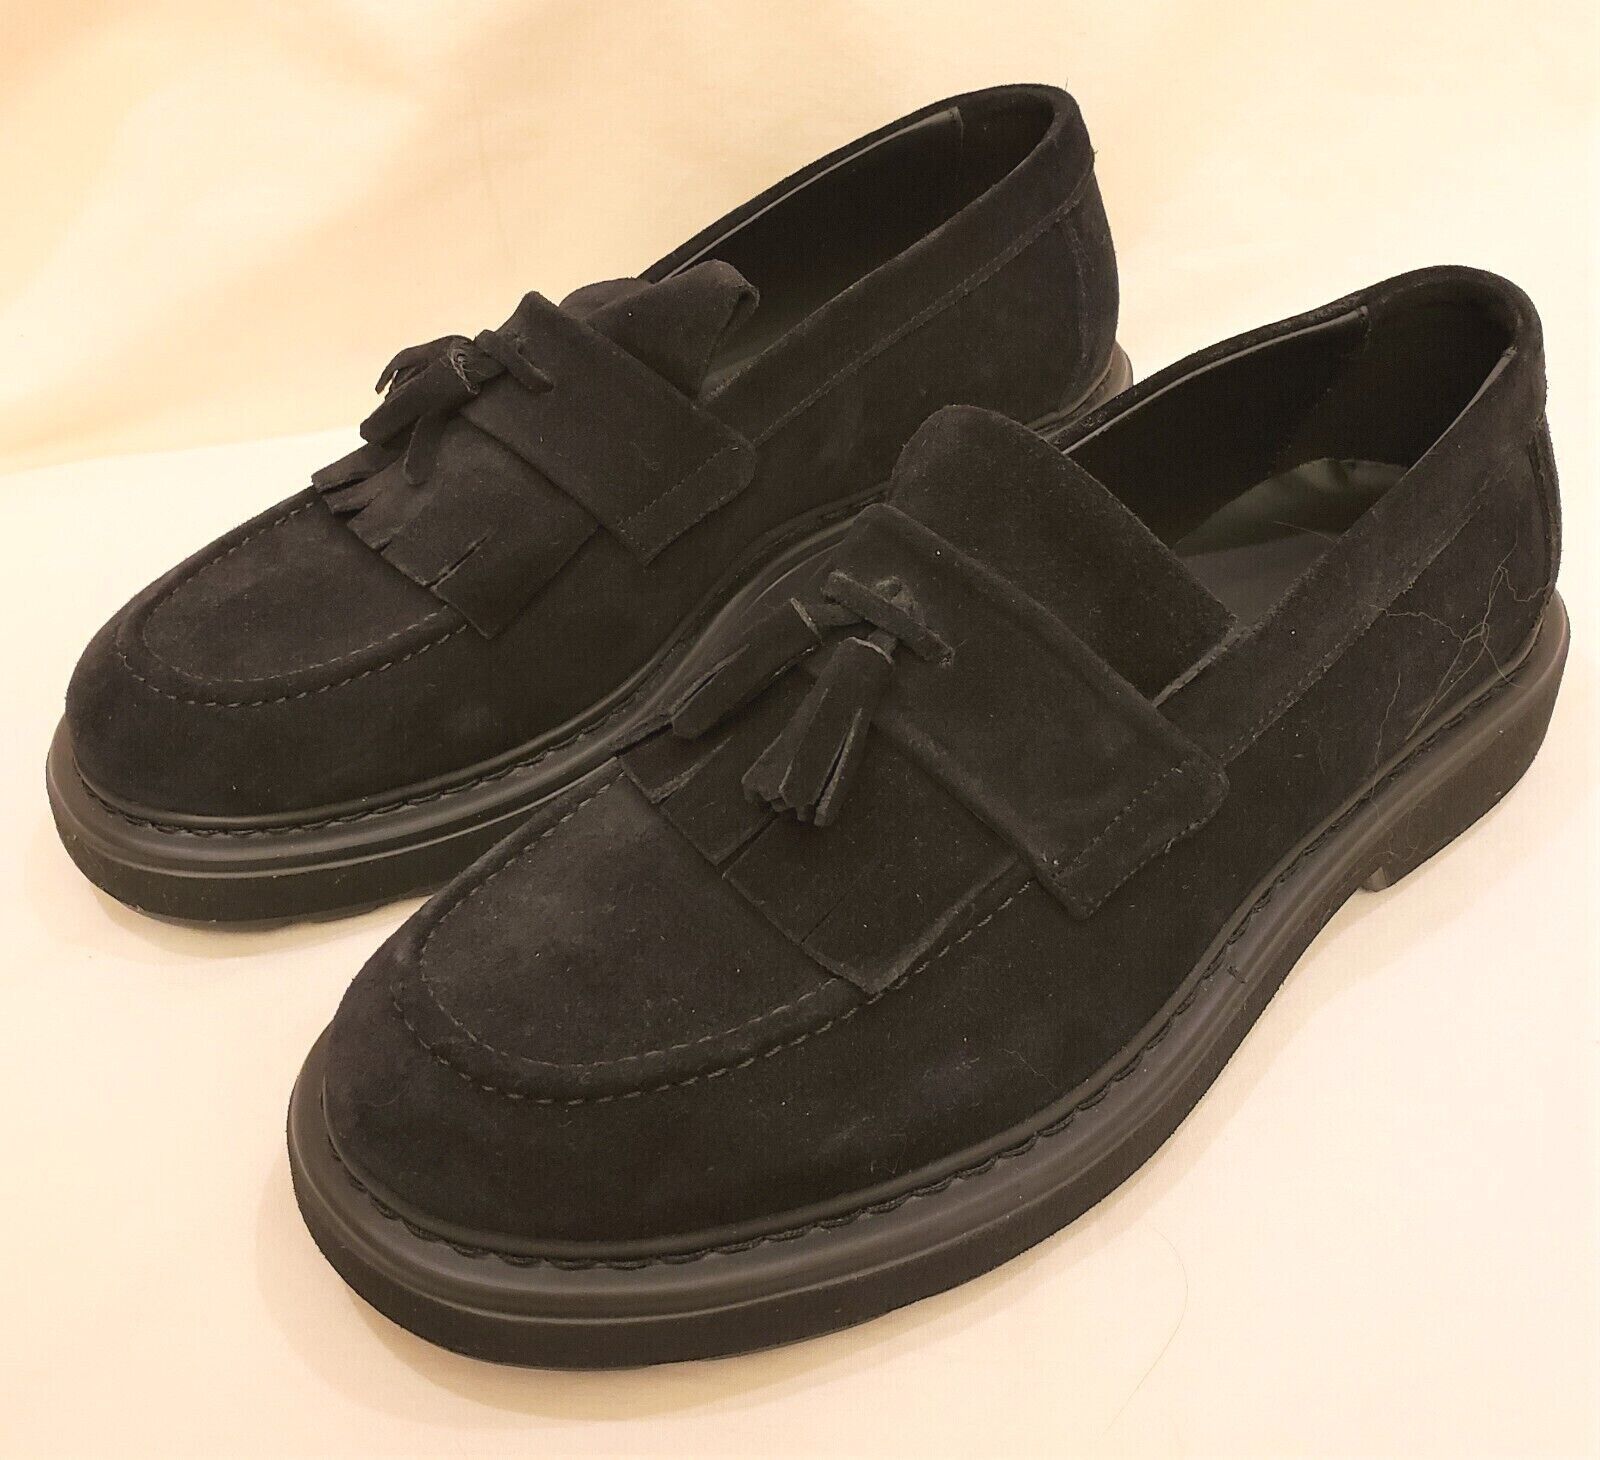 Emporio Armani  Men's Loafer Shoes Size-US 7.5 Black Leather/Suede - $149.97